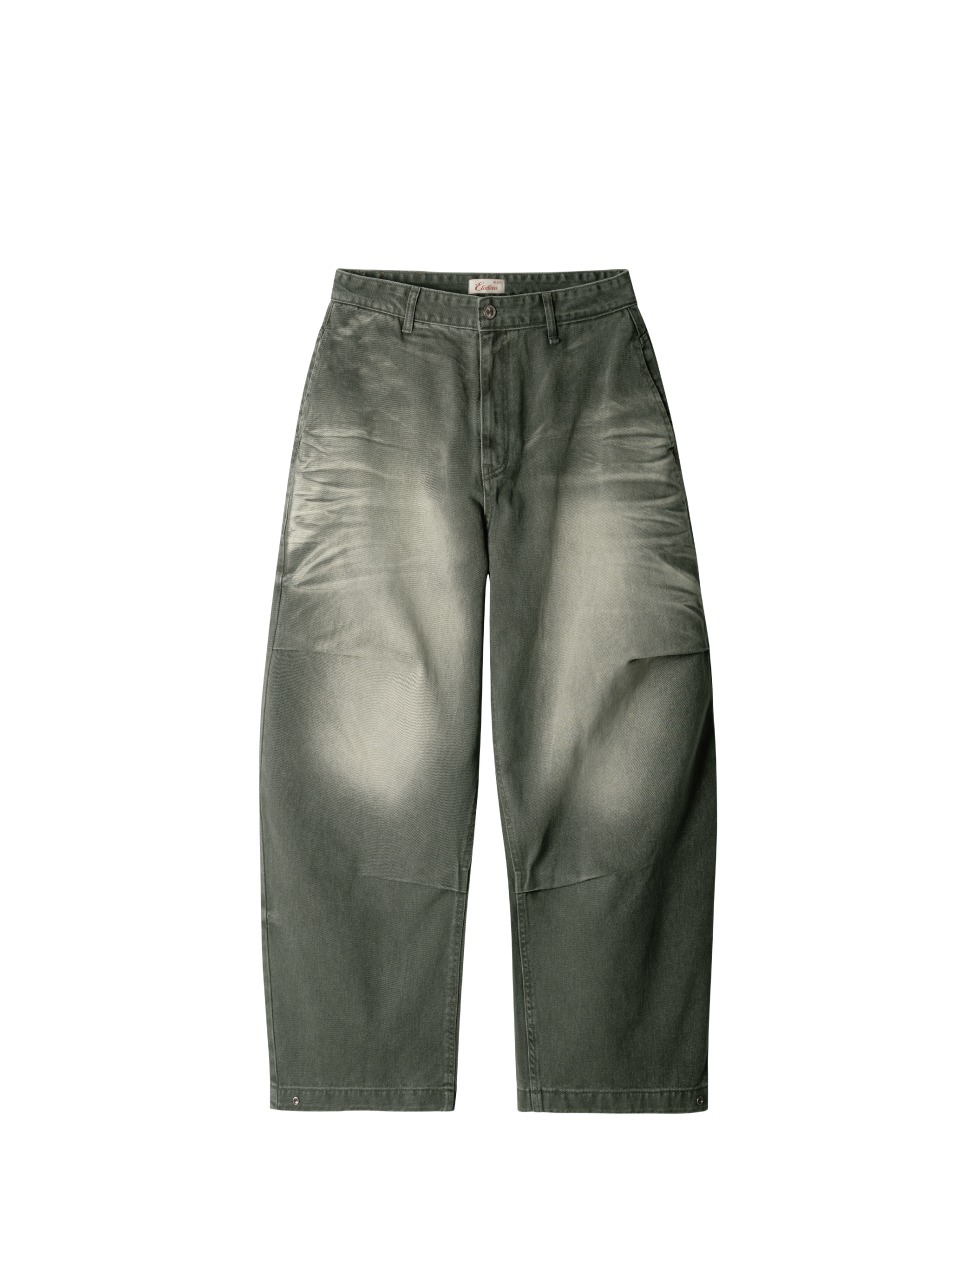 ETCE - WASHED BAGGY JEAN (KHAKI)